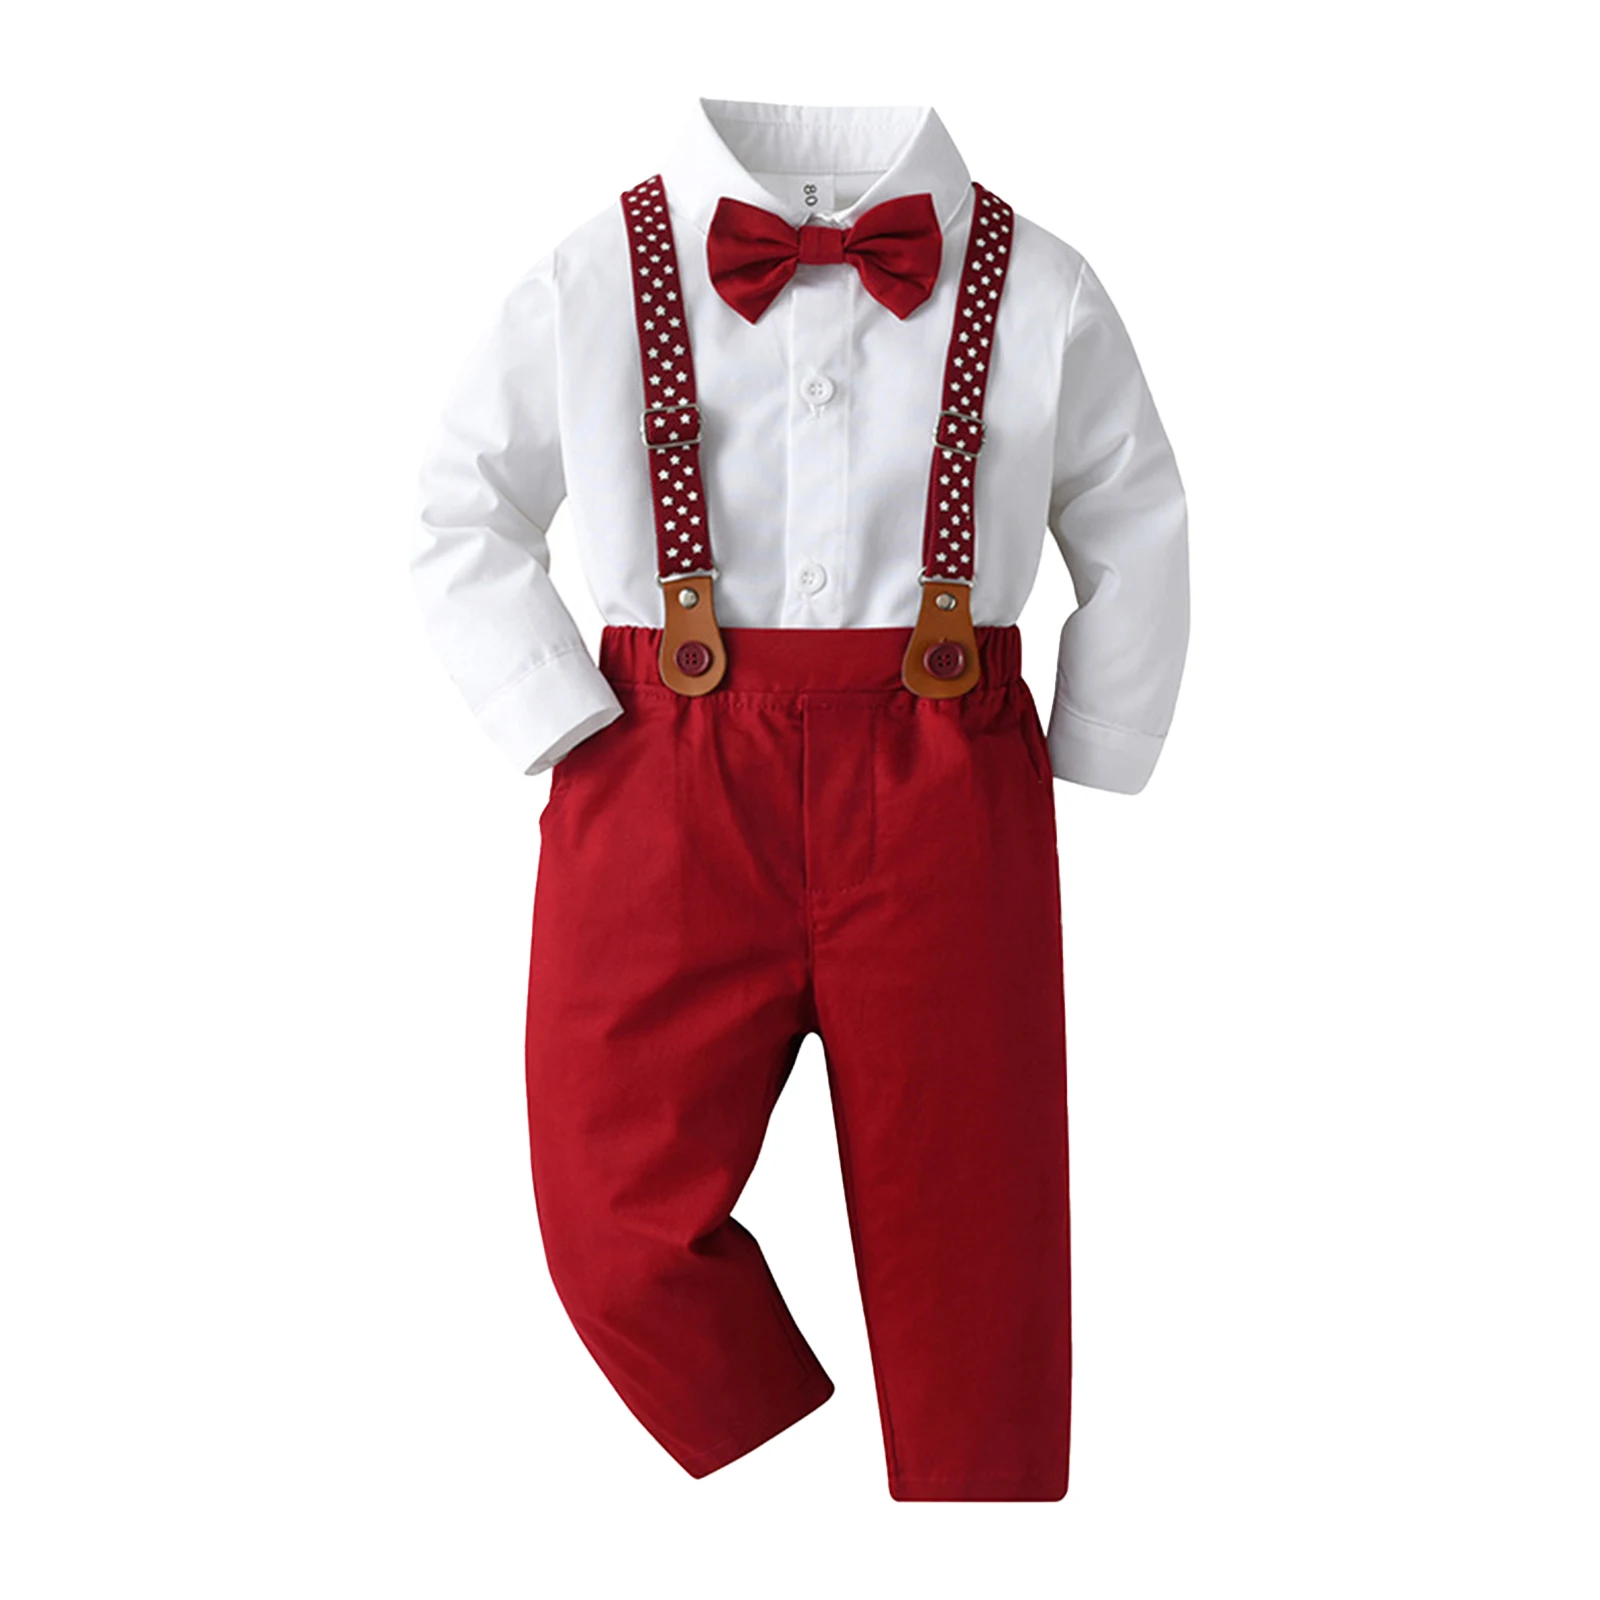 Baby Boys Gentleman Outfit Cotton Clothes Birthday Party Wedding Prom Gown Long Sleeve Shirt Top+Bowtie+Suspender Pants 3Pcs/Set